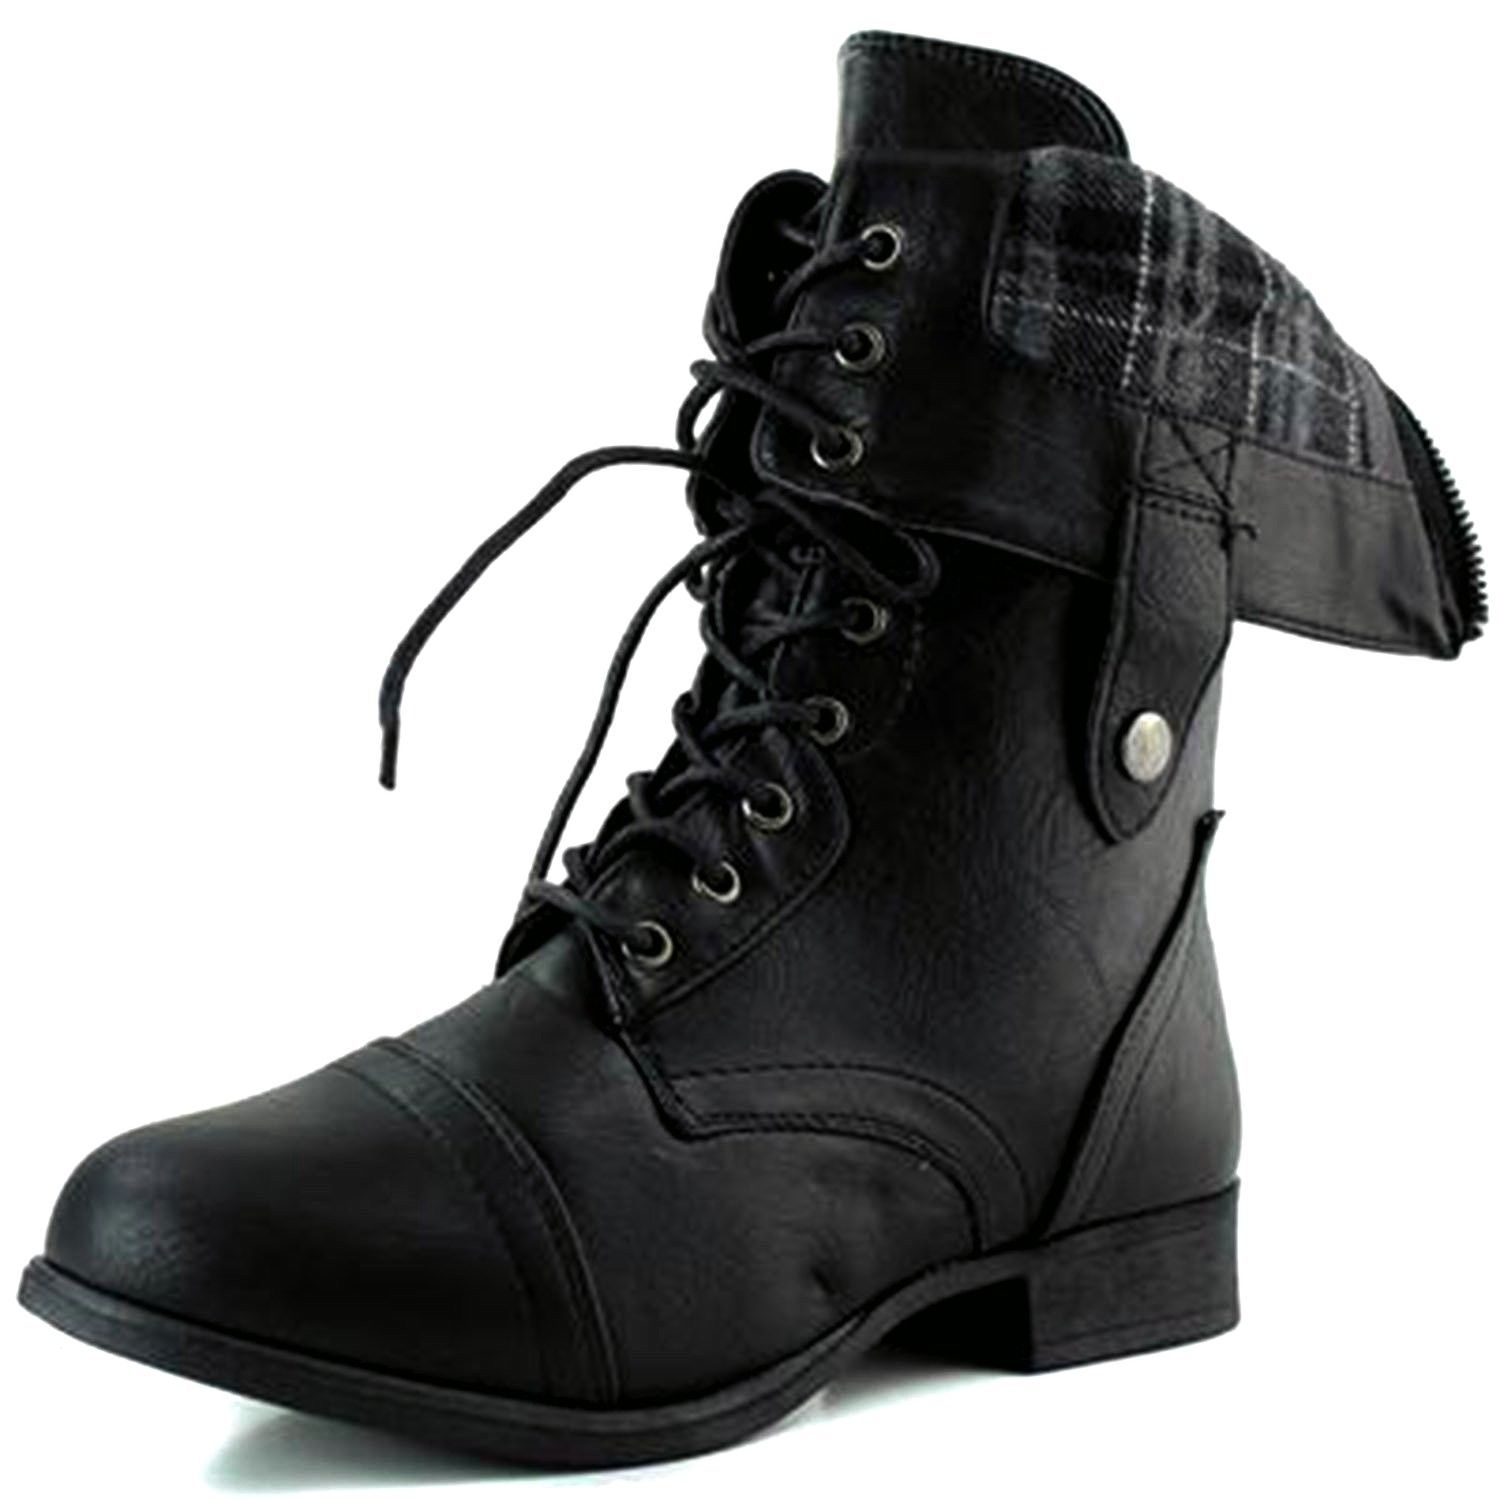 Fordable Round Toe Low Heel Combat Military Lace Up Mid Calf Womens Shoes Size 